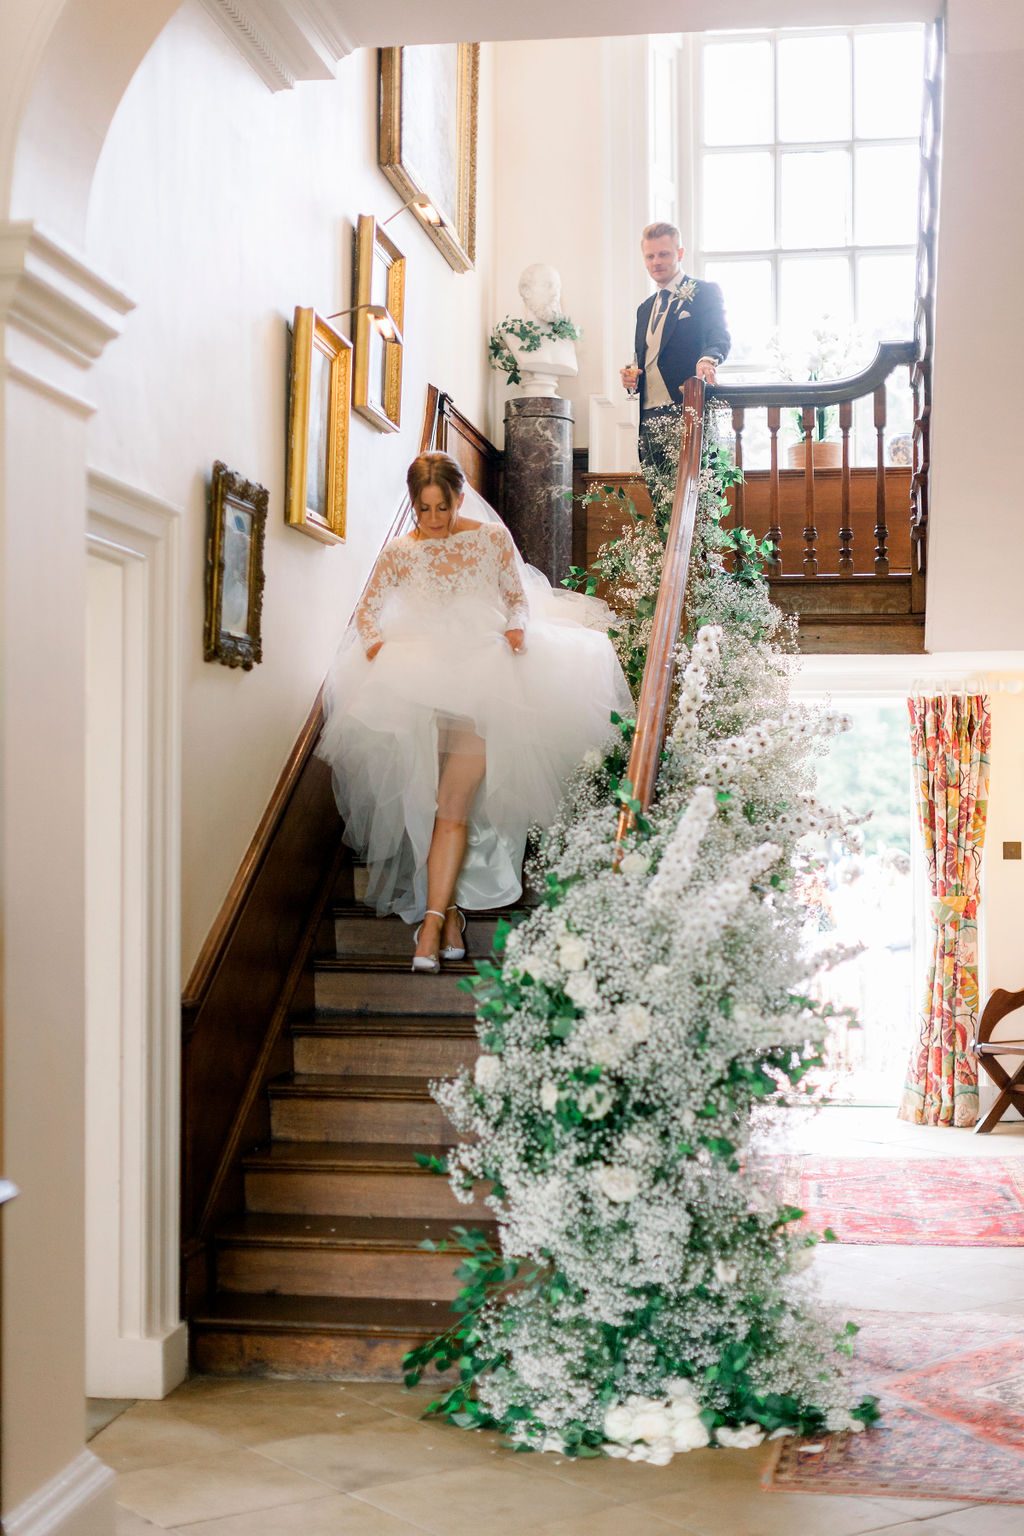 A bride in a white wedding dress and long veil walks down an antique wooden staircase that has candles arranged at the bottom and white and green flowers entwined around the bannister